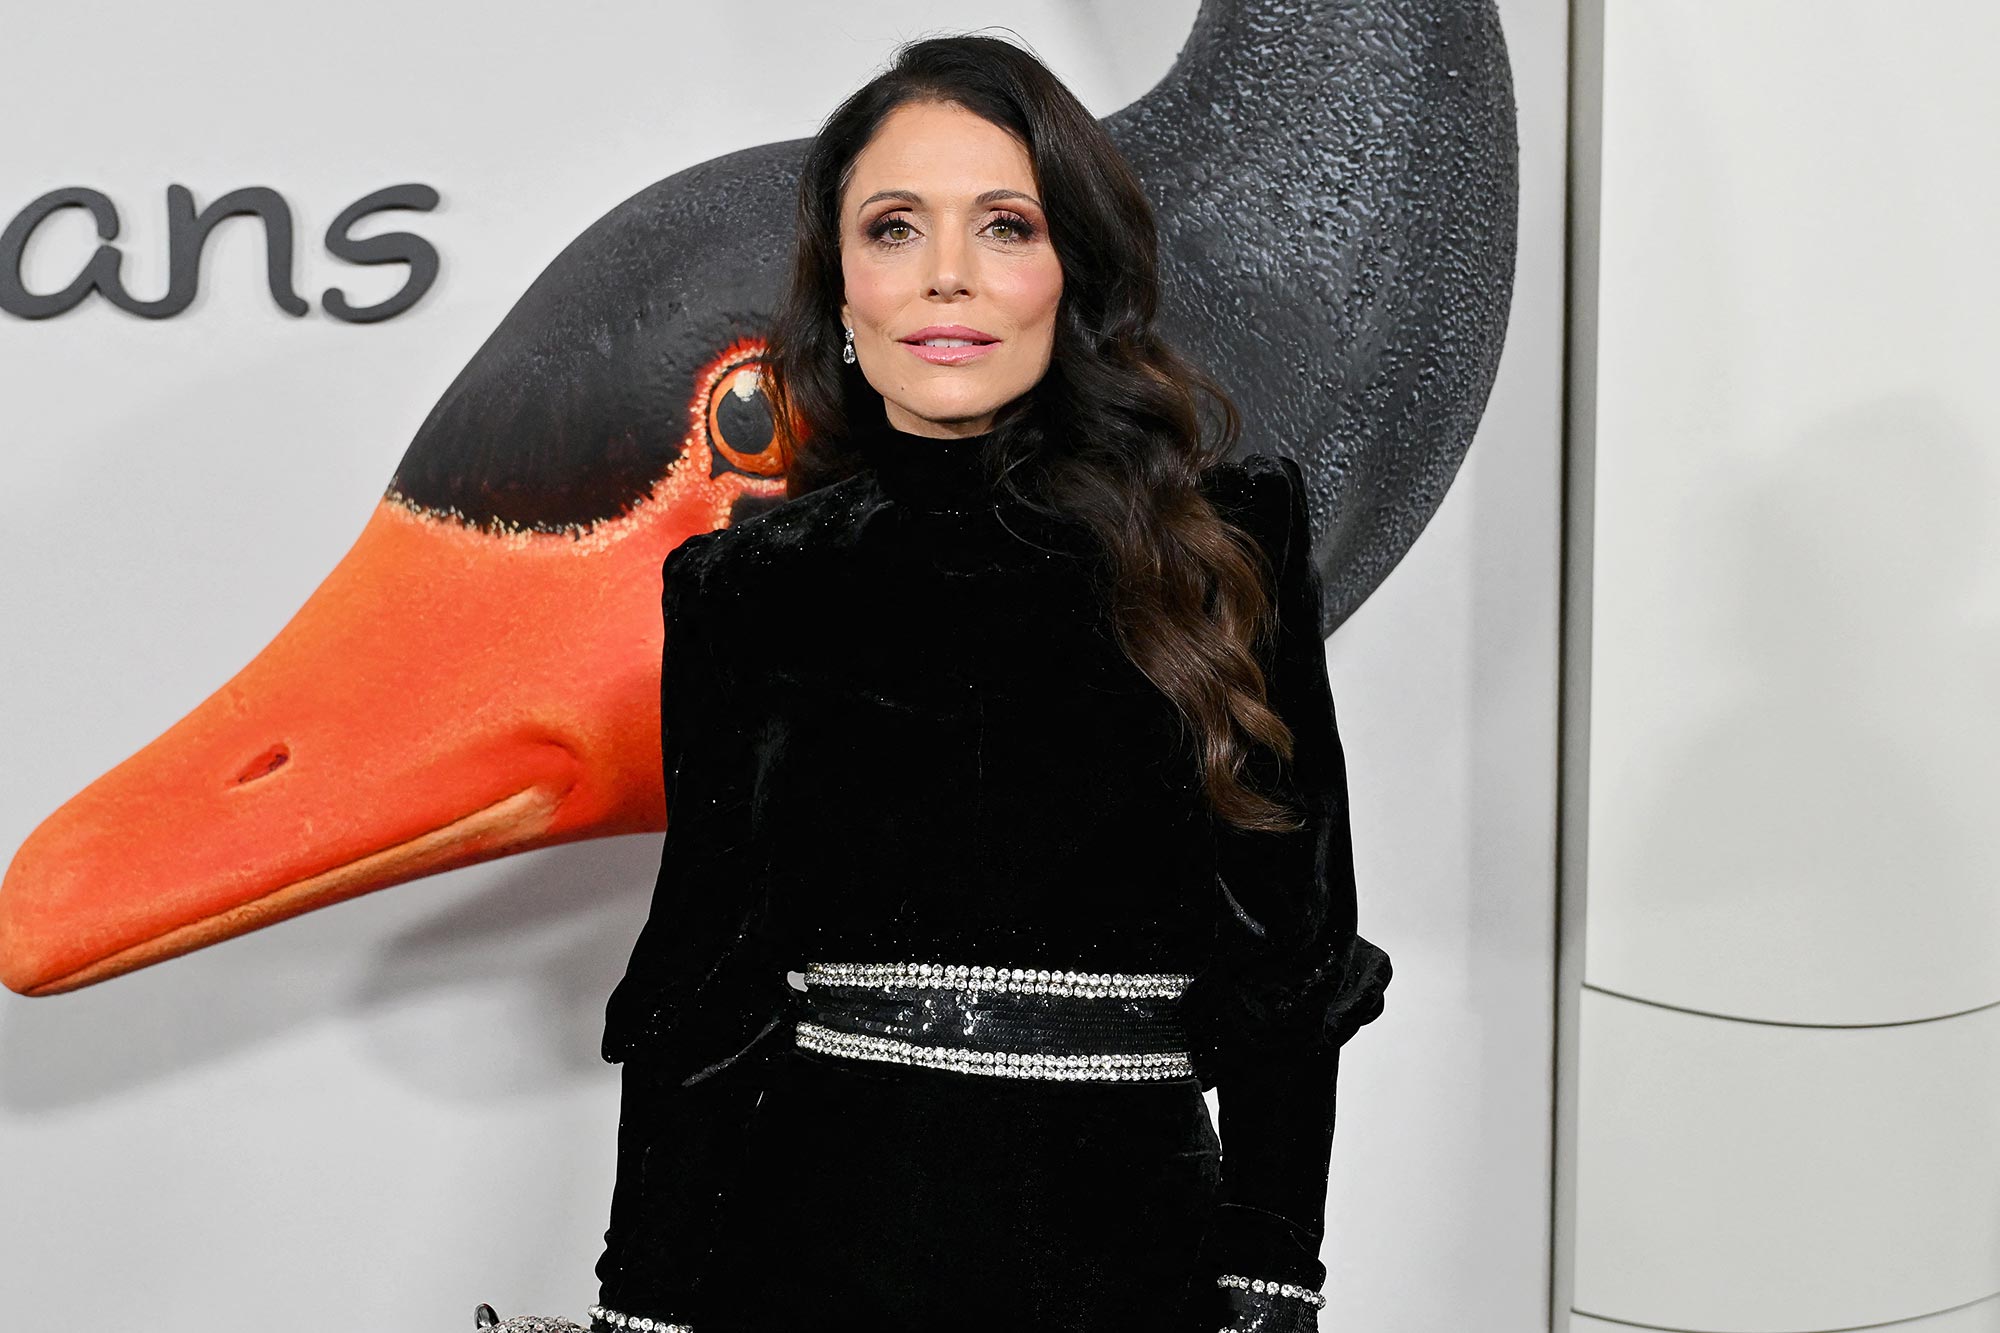 Bethenny Frankel Says She Was 'Relieved' by Miscarriage Before Divorce